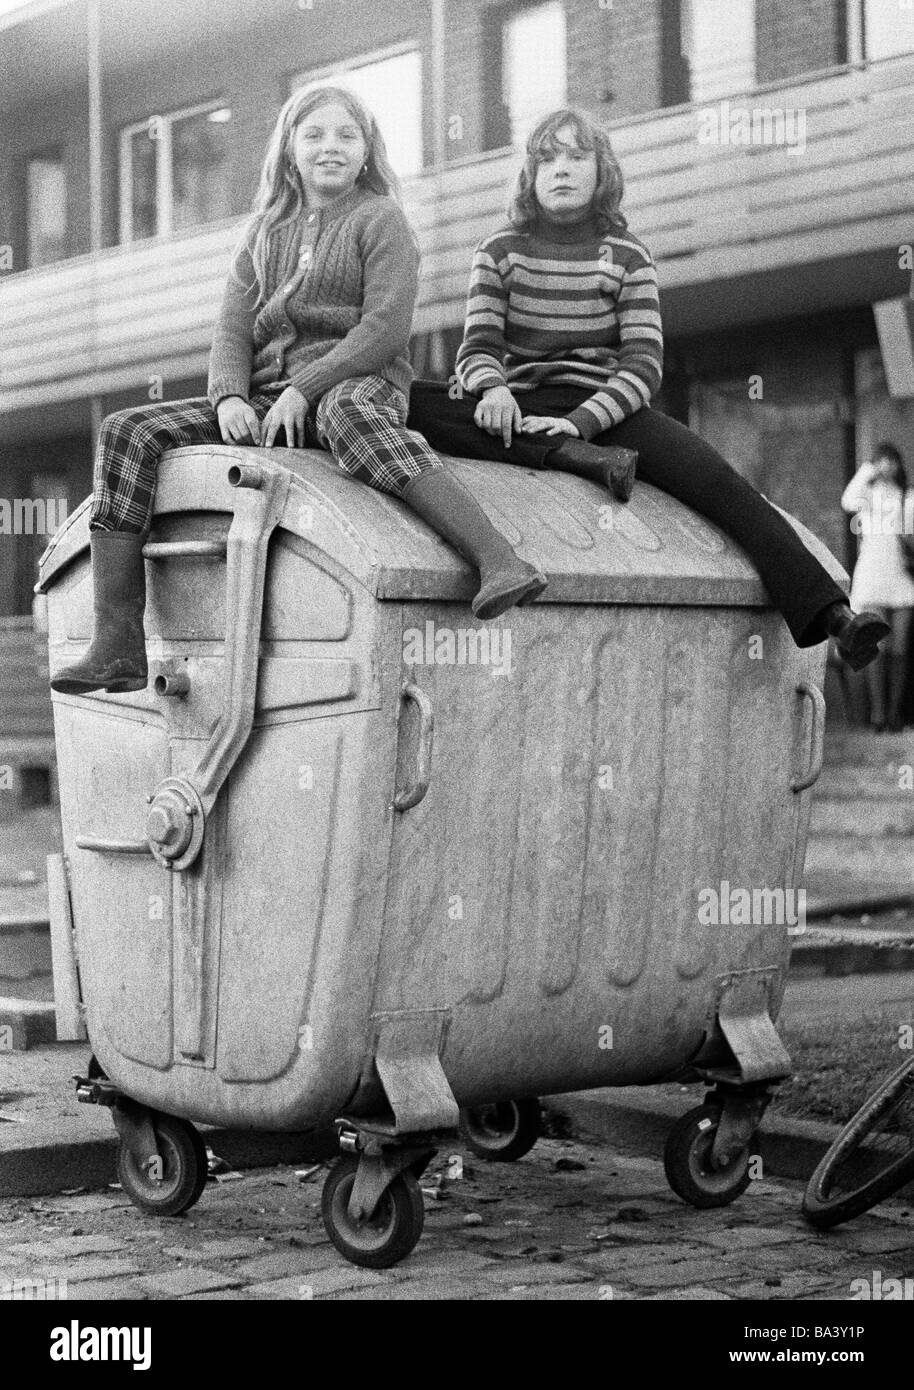 Seventies, black and white photo, people, children, two girls sitting on a refuse container, street kids, aged 10 to 13 years Stock Photo